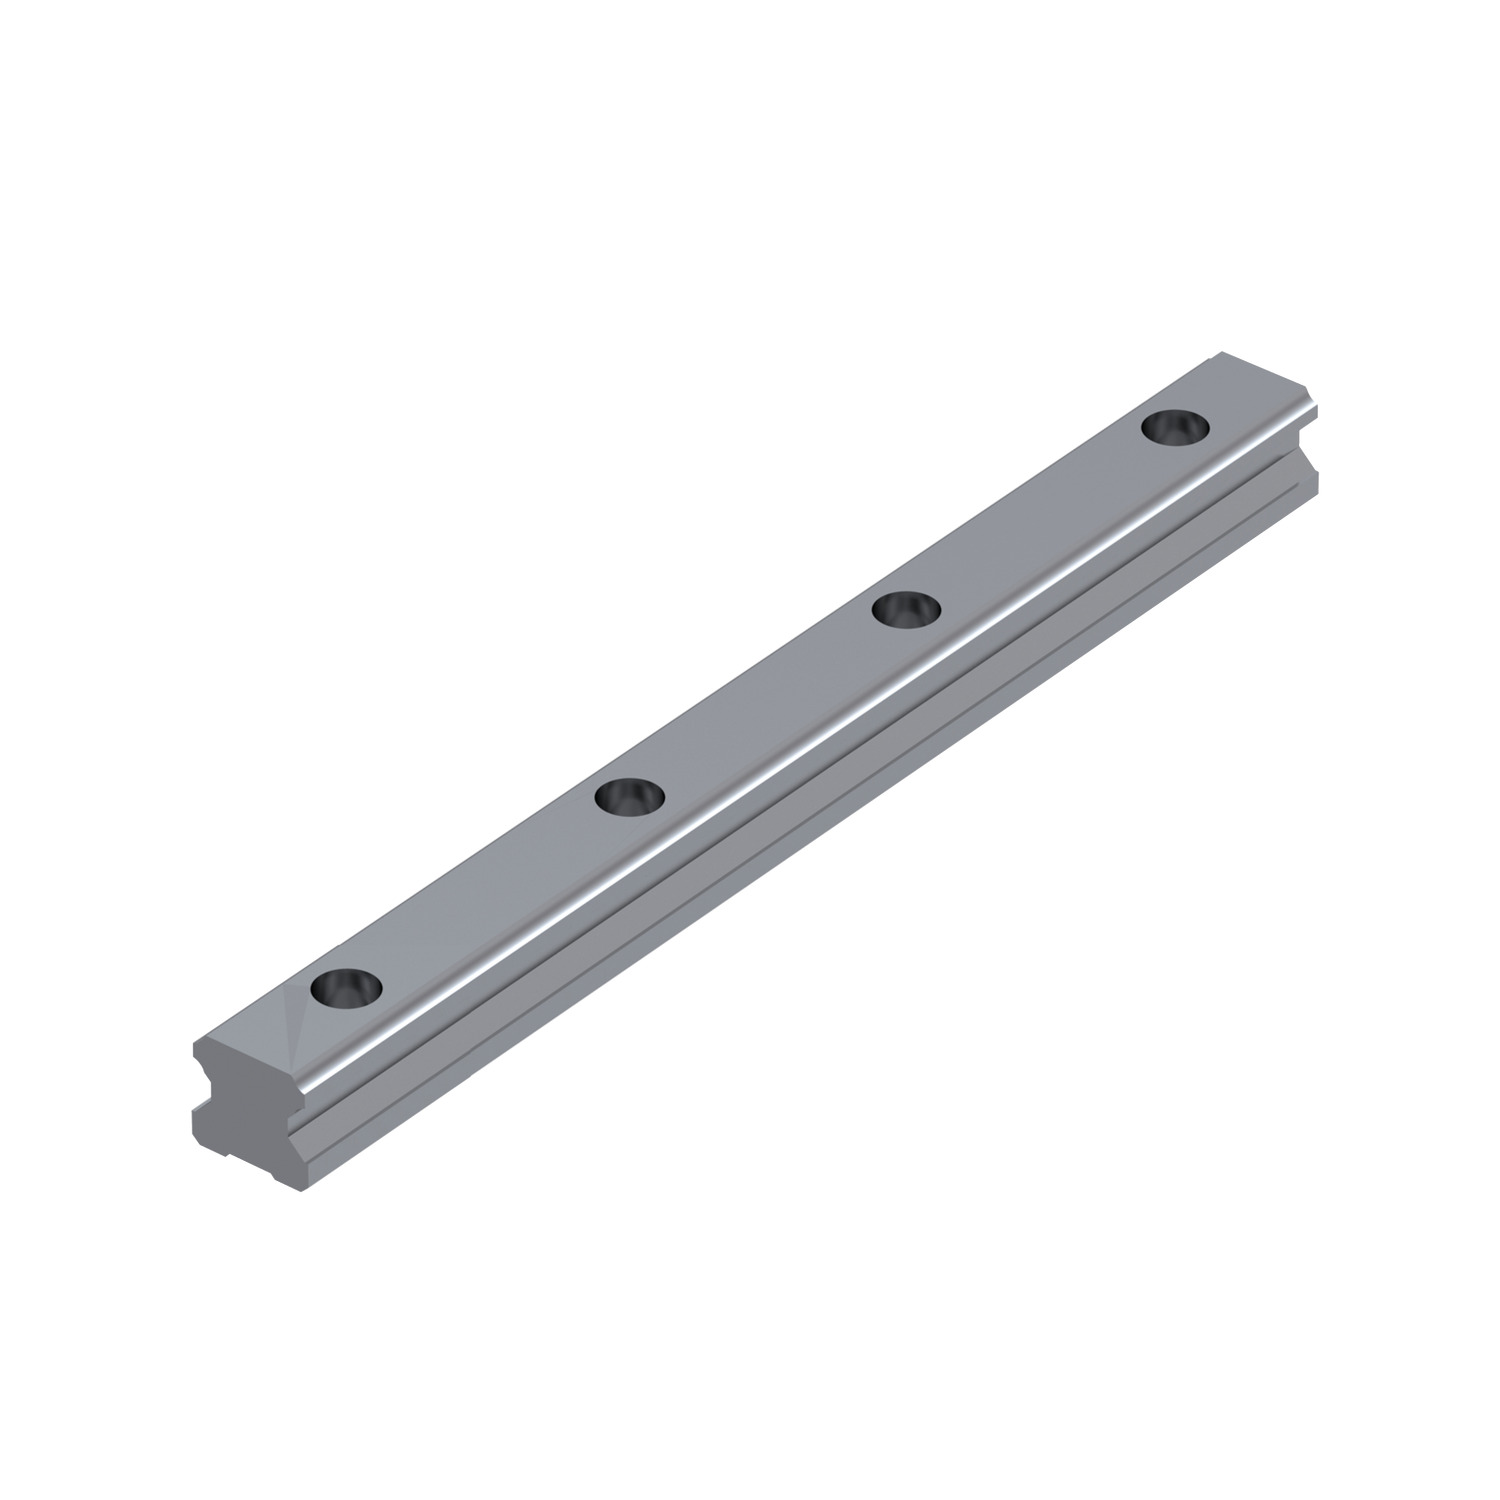 L1016.20-2320 Linear guide rail 20mm 2320 Hardened and ground steel. EC:20163464 WG:05063055289603